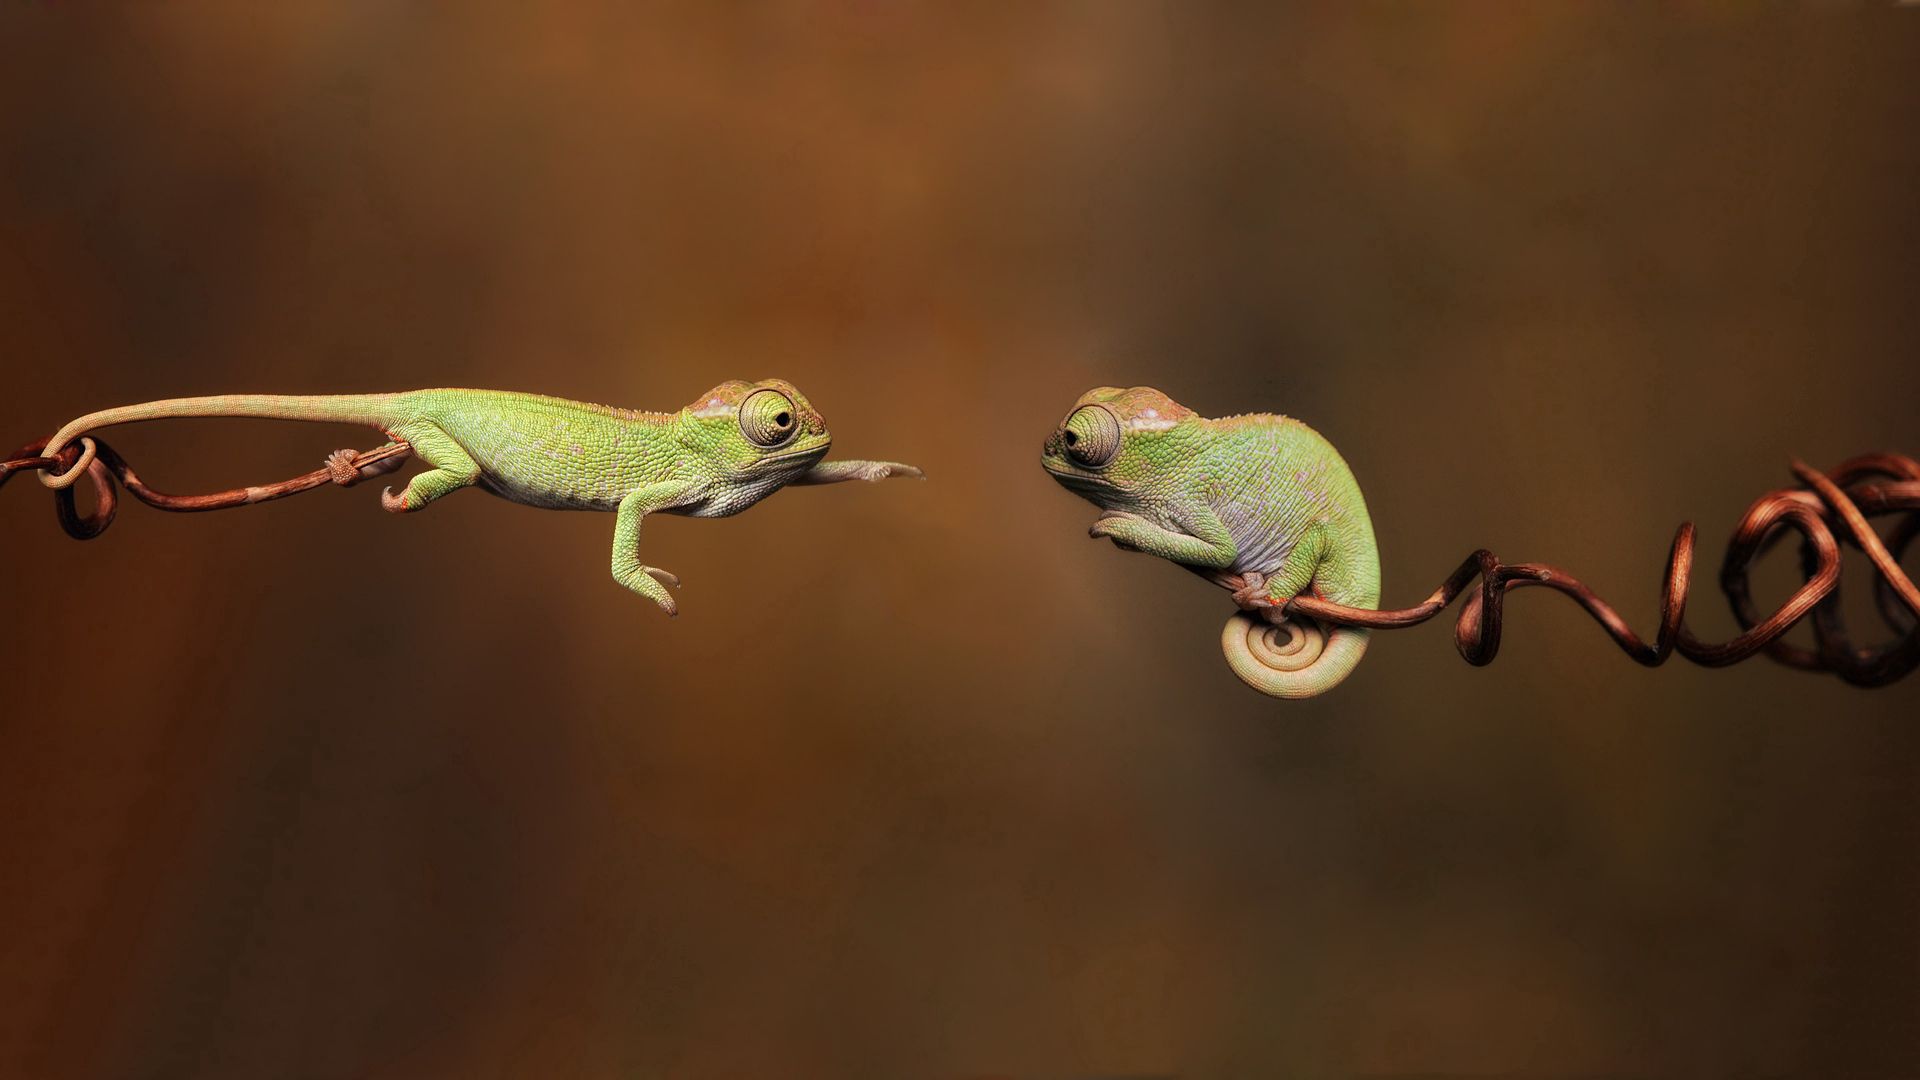 animals, chameleons, couple, pair, branches, reptiles